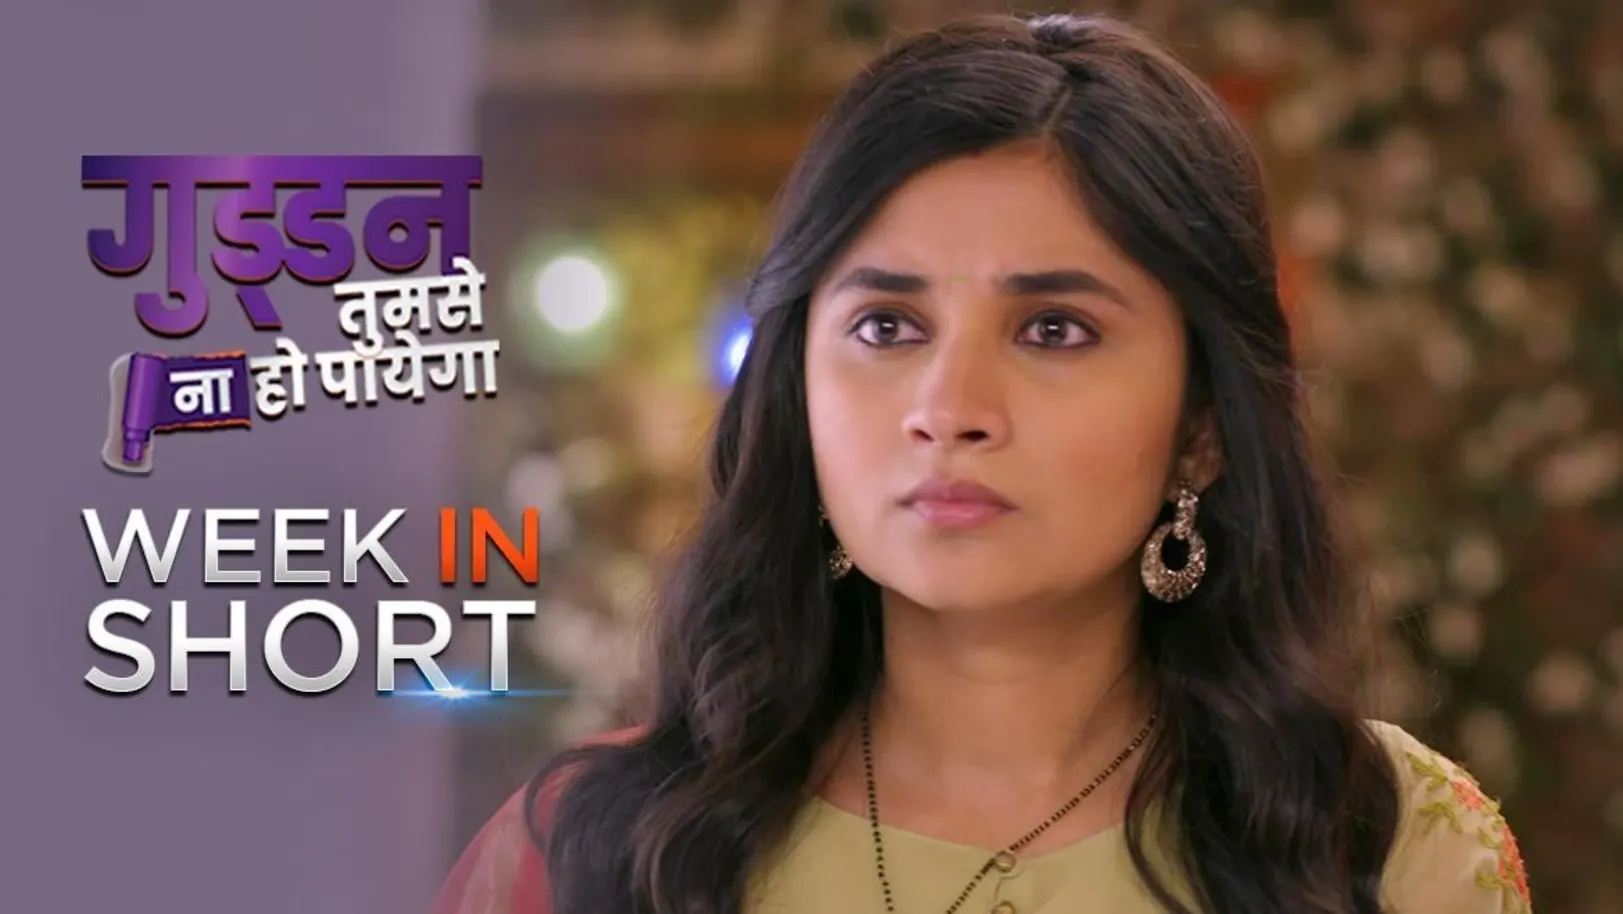 Week in Short - Guddan Tumse Na Ho Payega 10th August 2020 to 14th August 2020 15th August 2020 Webisode